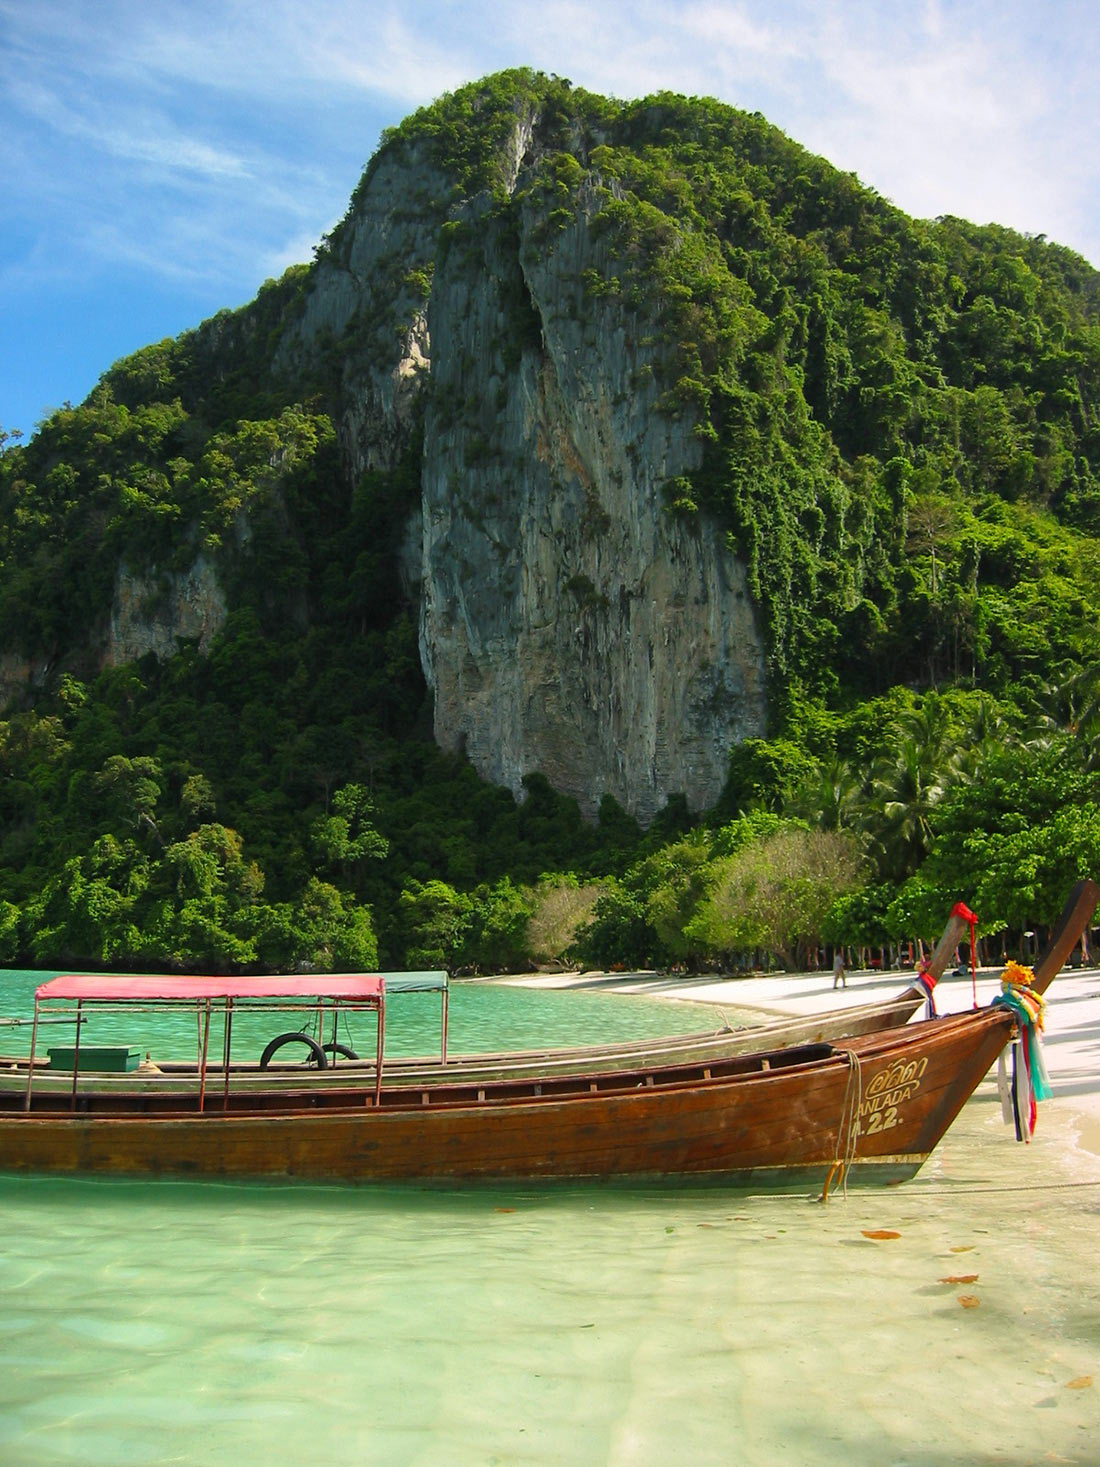 Longtail boat on Phi Phi